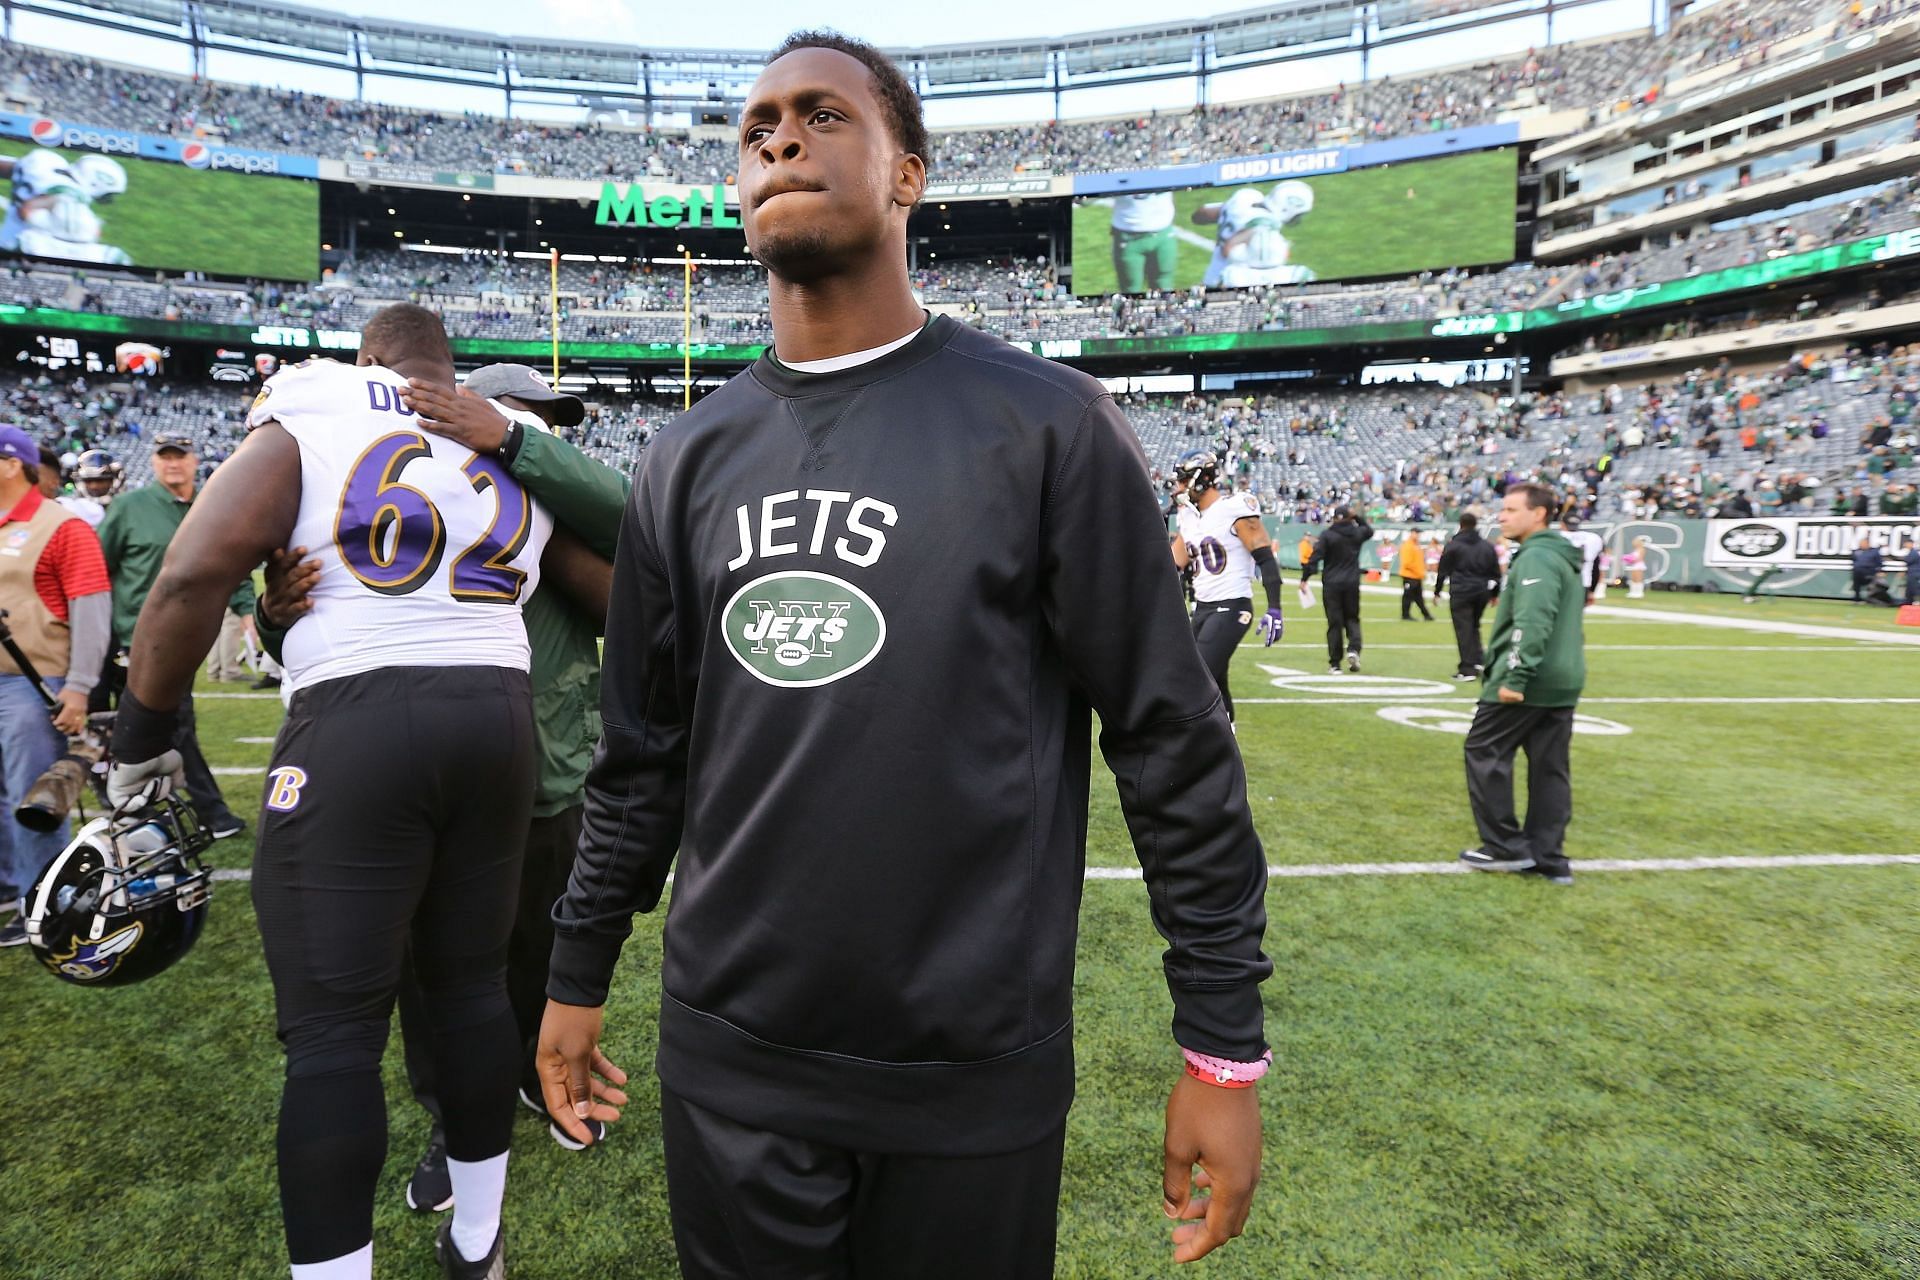 A rookie win over Tom Brady was the highlight of an awful New York Jets career for Geno Smith